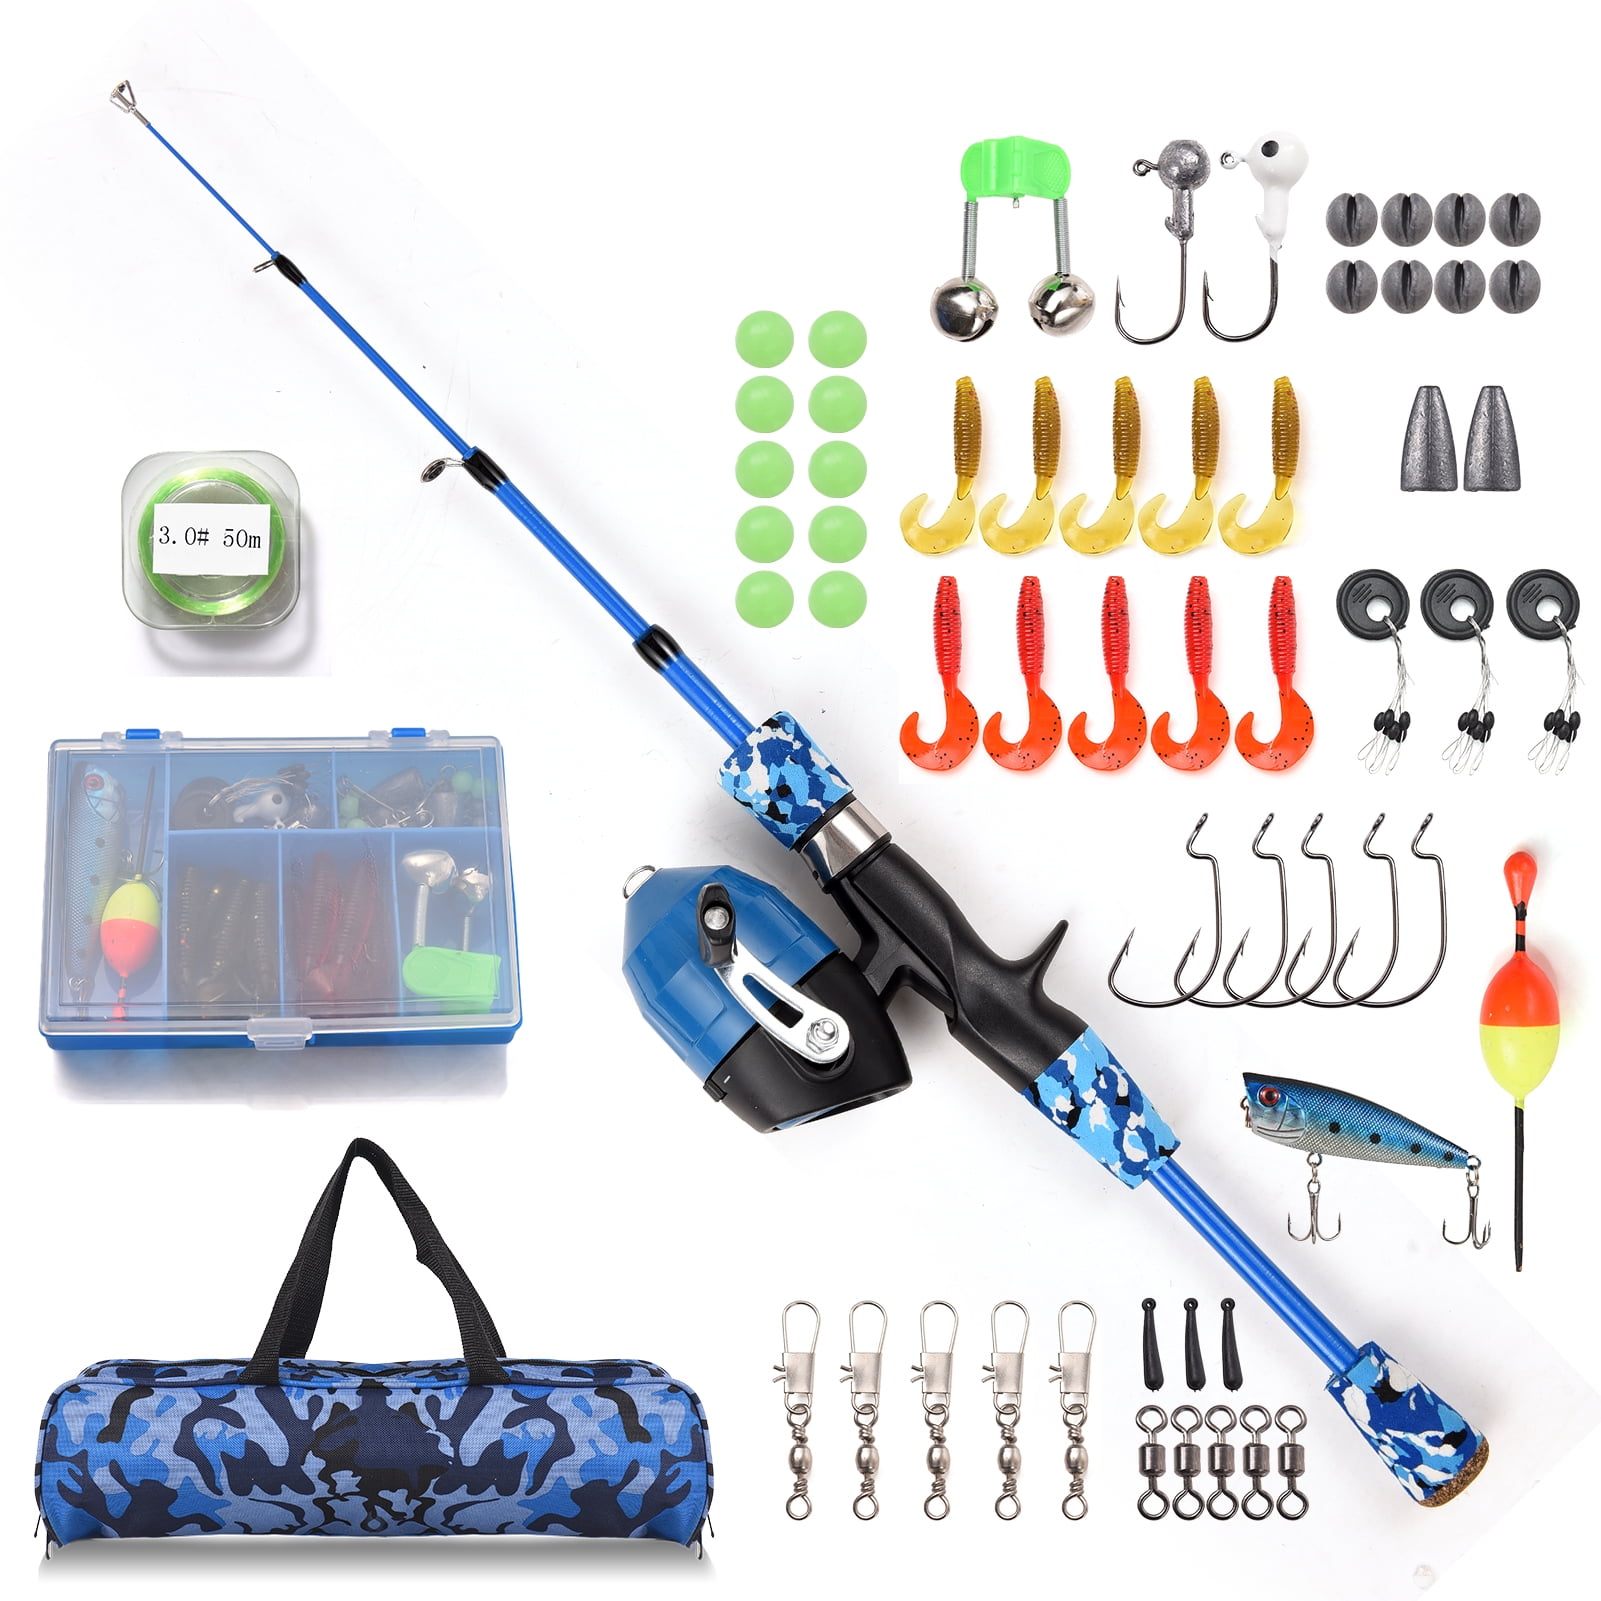 Owsoo Fishing Rod and Reel Combo Full Kit 1.2m1.5m Telescopic Casting Rod Pole with Spincast Reel and Hooks Lures Swivels Carry Bag, Blue